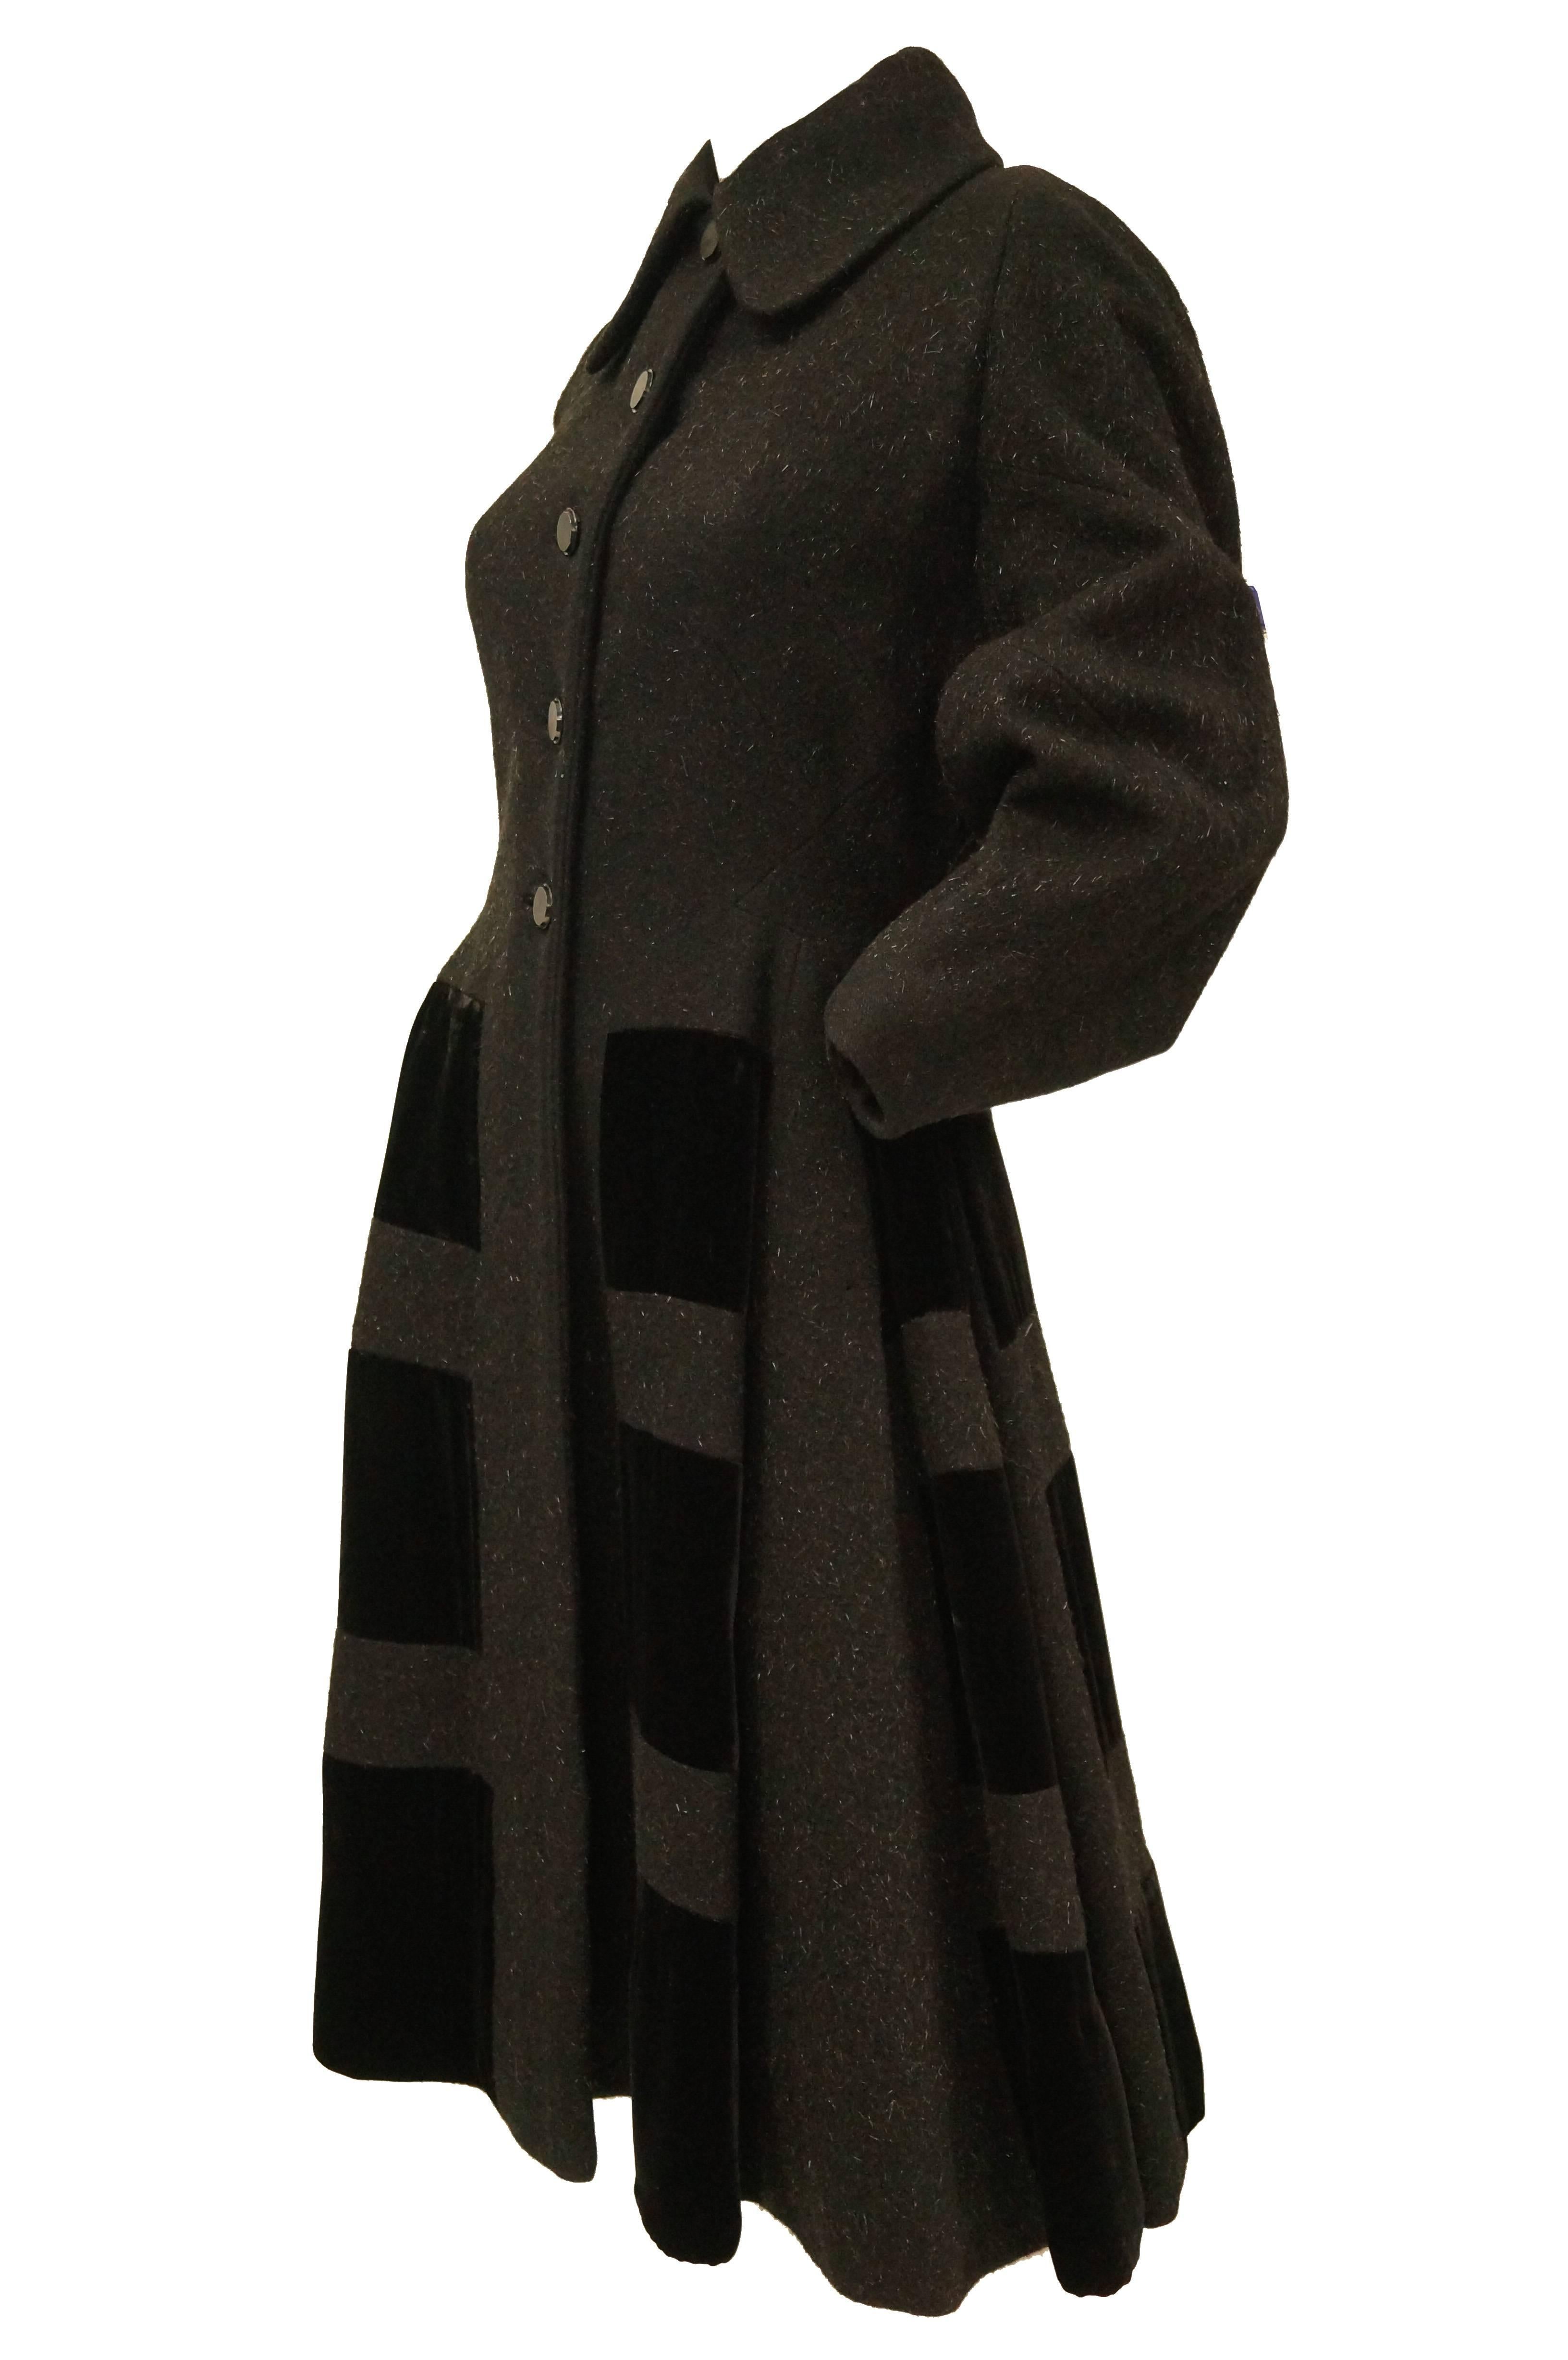 Beautiful mohair wool blend and velvet princess coat by Lilli Ann. This coat features an exaggerated arrow collar, long, cuffed sleeves, and a skirt that flares out from the narrow waist of the coat. The front of the coat features five buttons